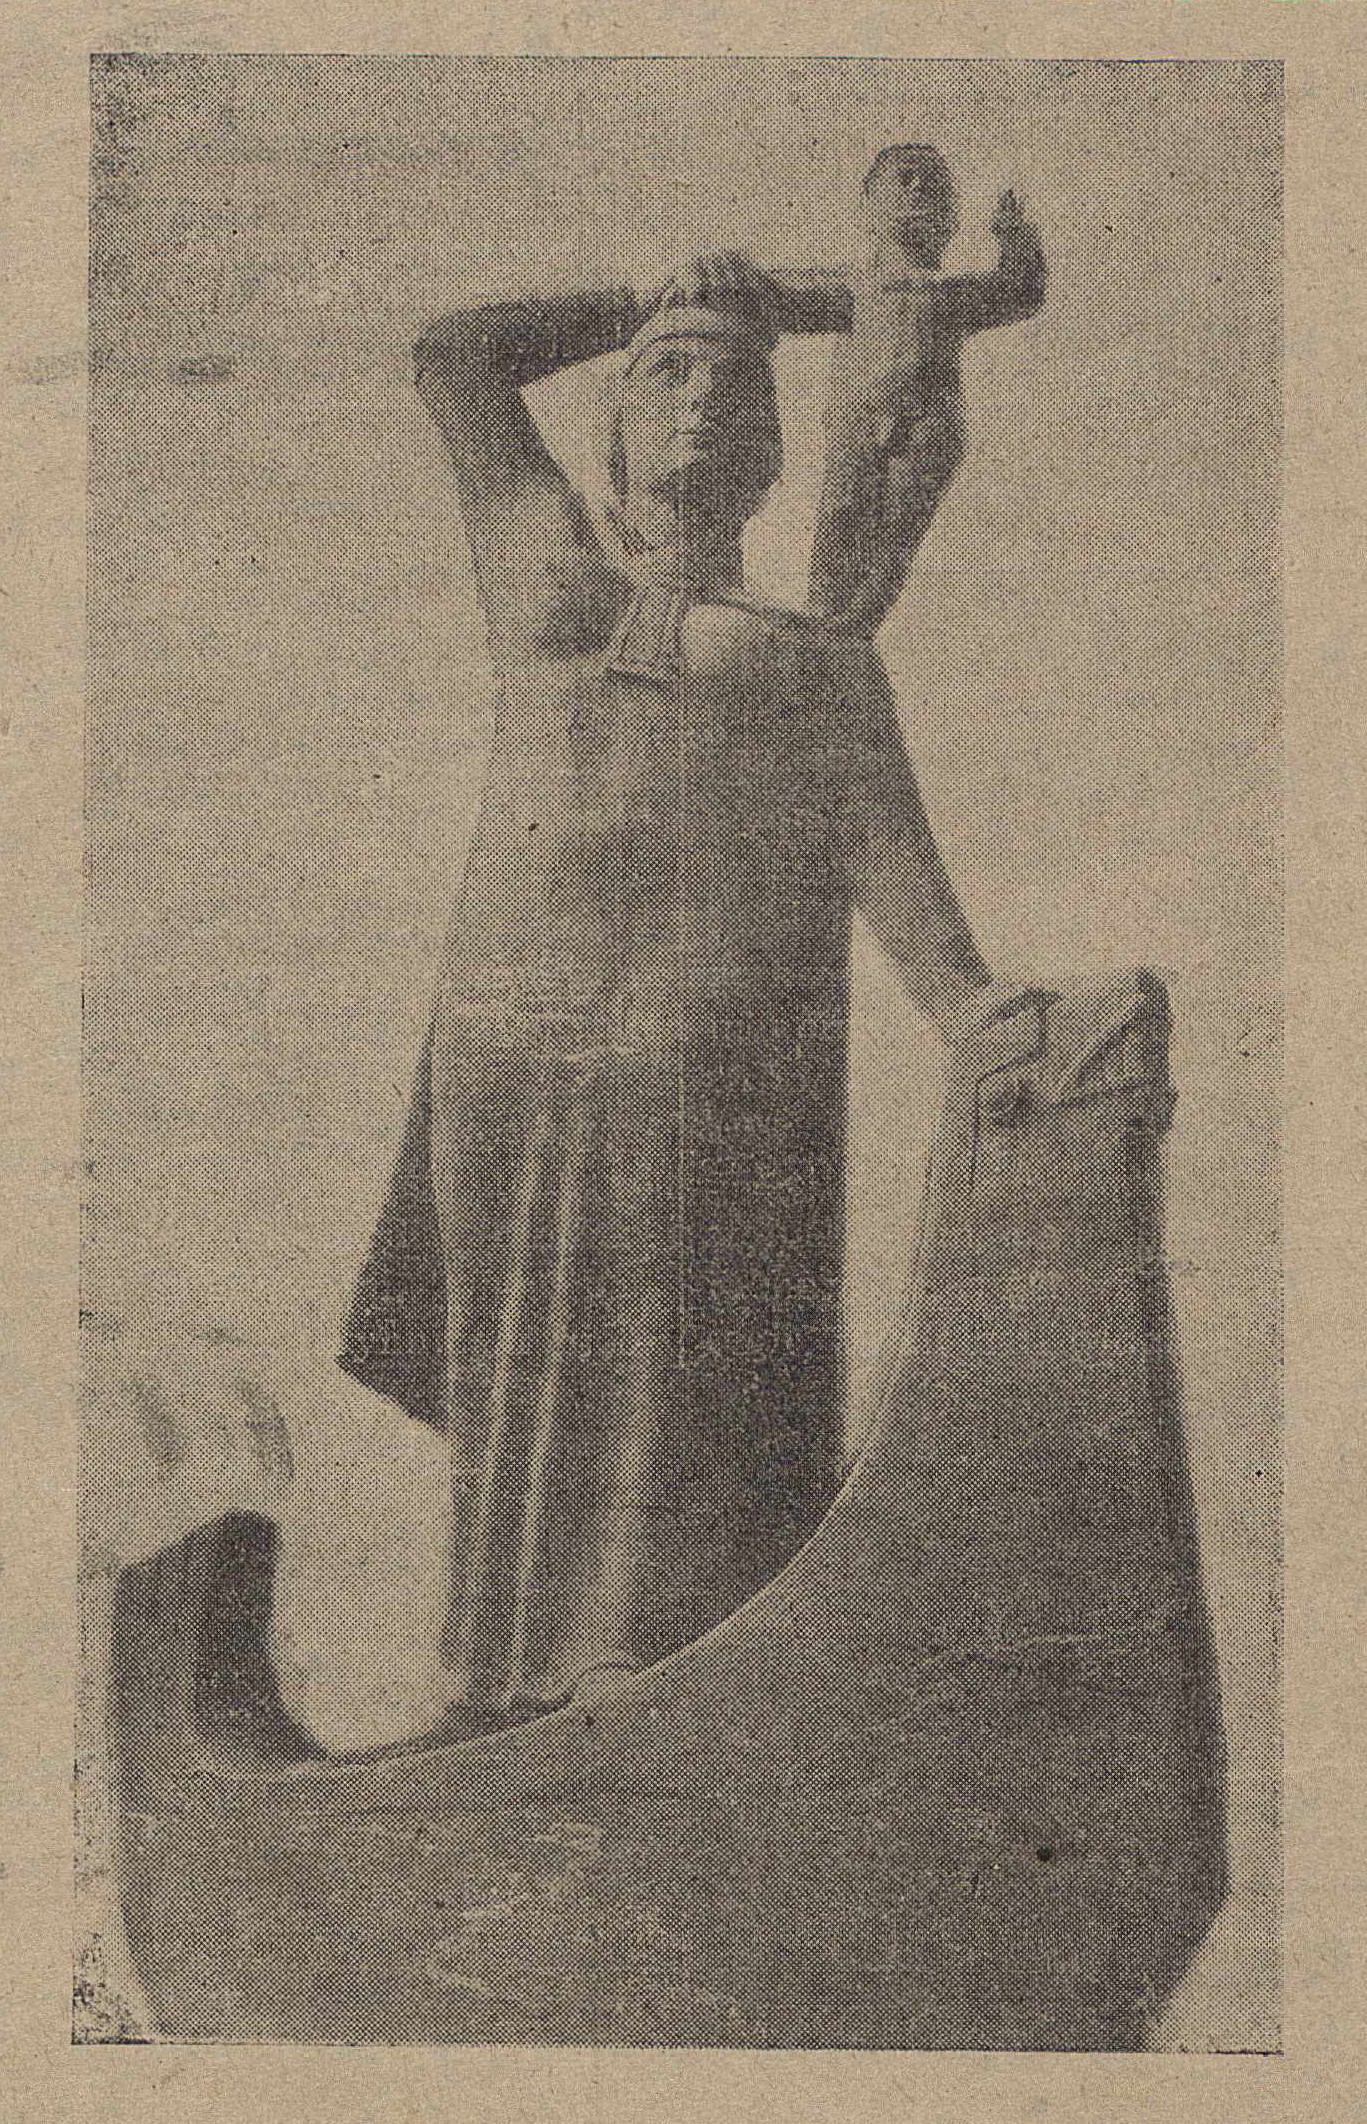 image of Ásmundur Sveinsson’s Fyrsta hvíta móðirin í Ameríku from the December 1, 1938 issue of the Icelandic newspaper Alþýðublaðið. This is a sepia-toned and faded photograph from a newspaper depicting a female with a baby on her right shoulder. The woman is standing in a small canoe-looking boat.